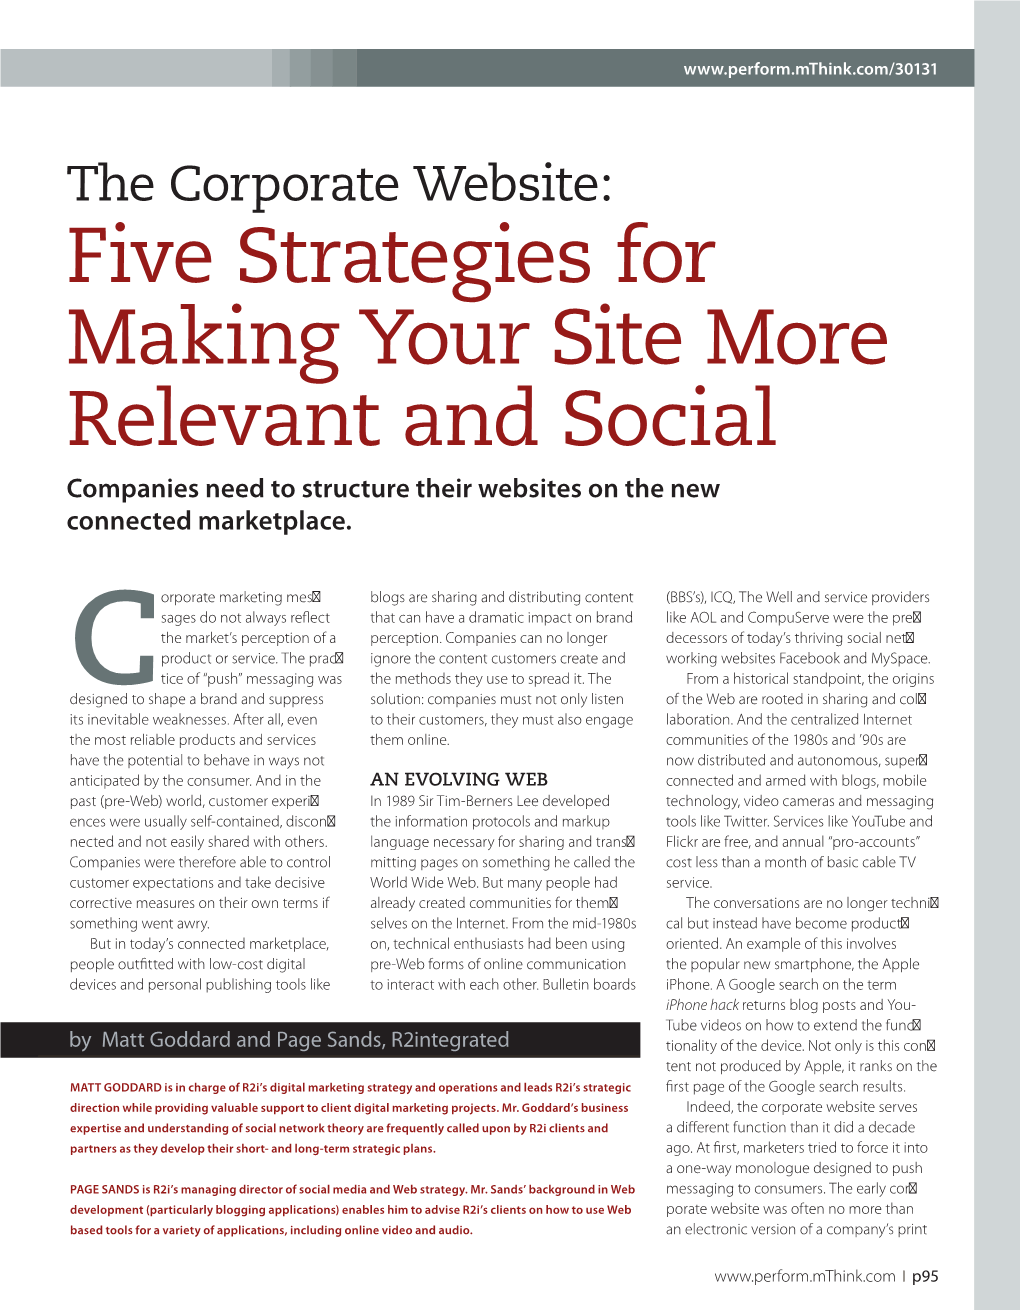 Five Strategies for Making Your Site More Relevant and Social Companies Need to Structure Their Websites on the New Connected Marketplace